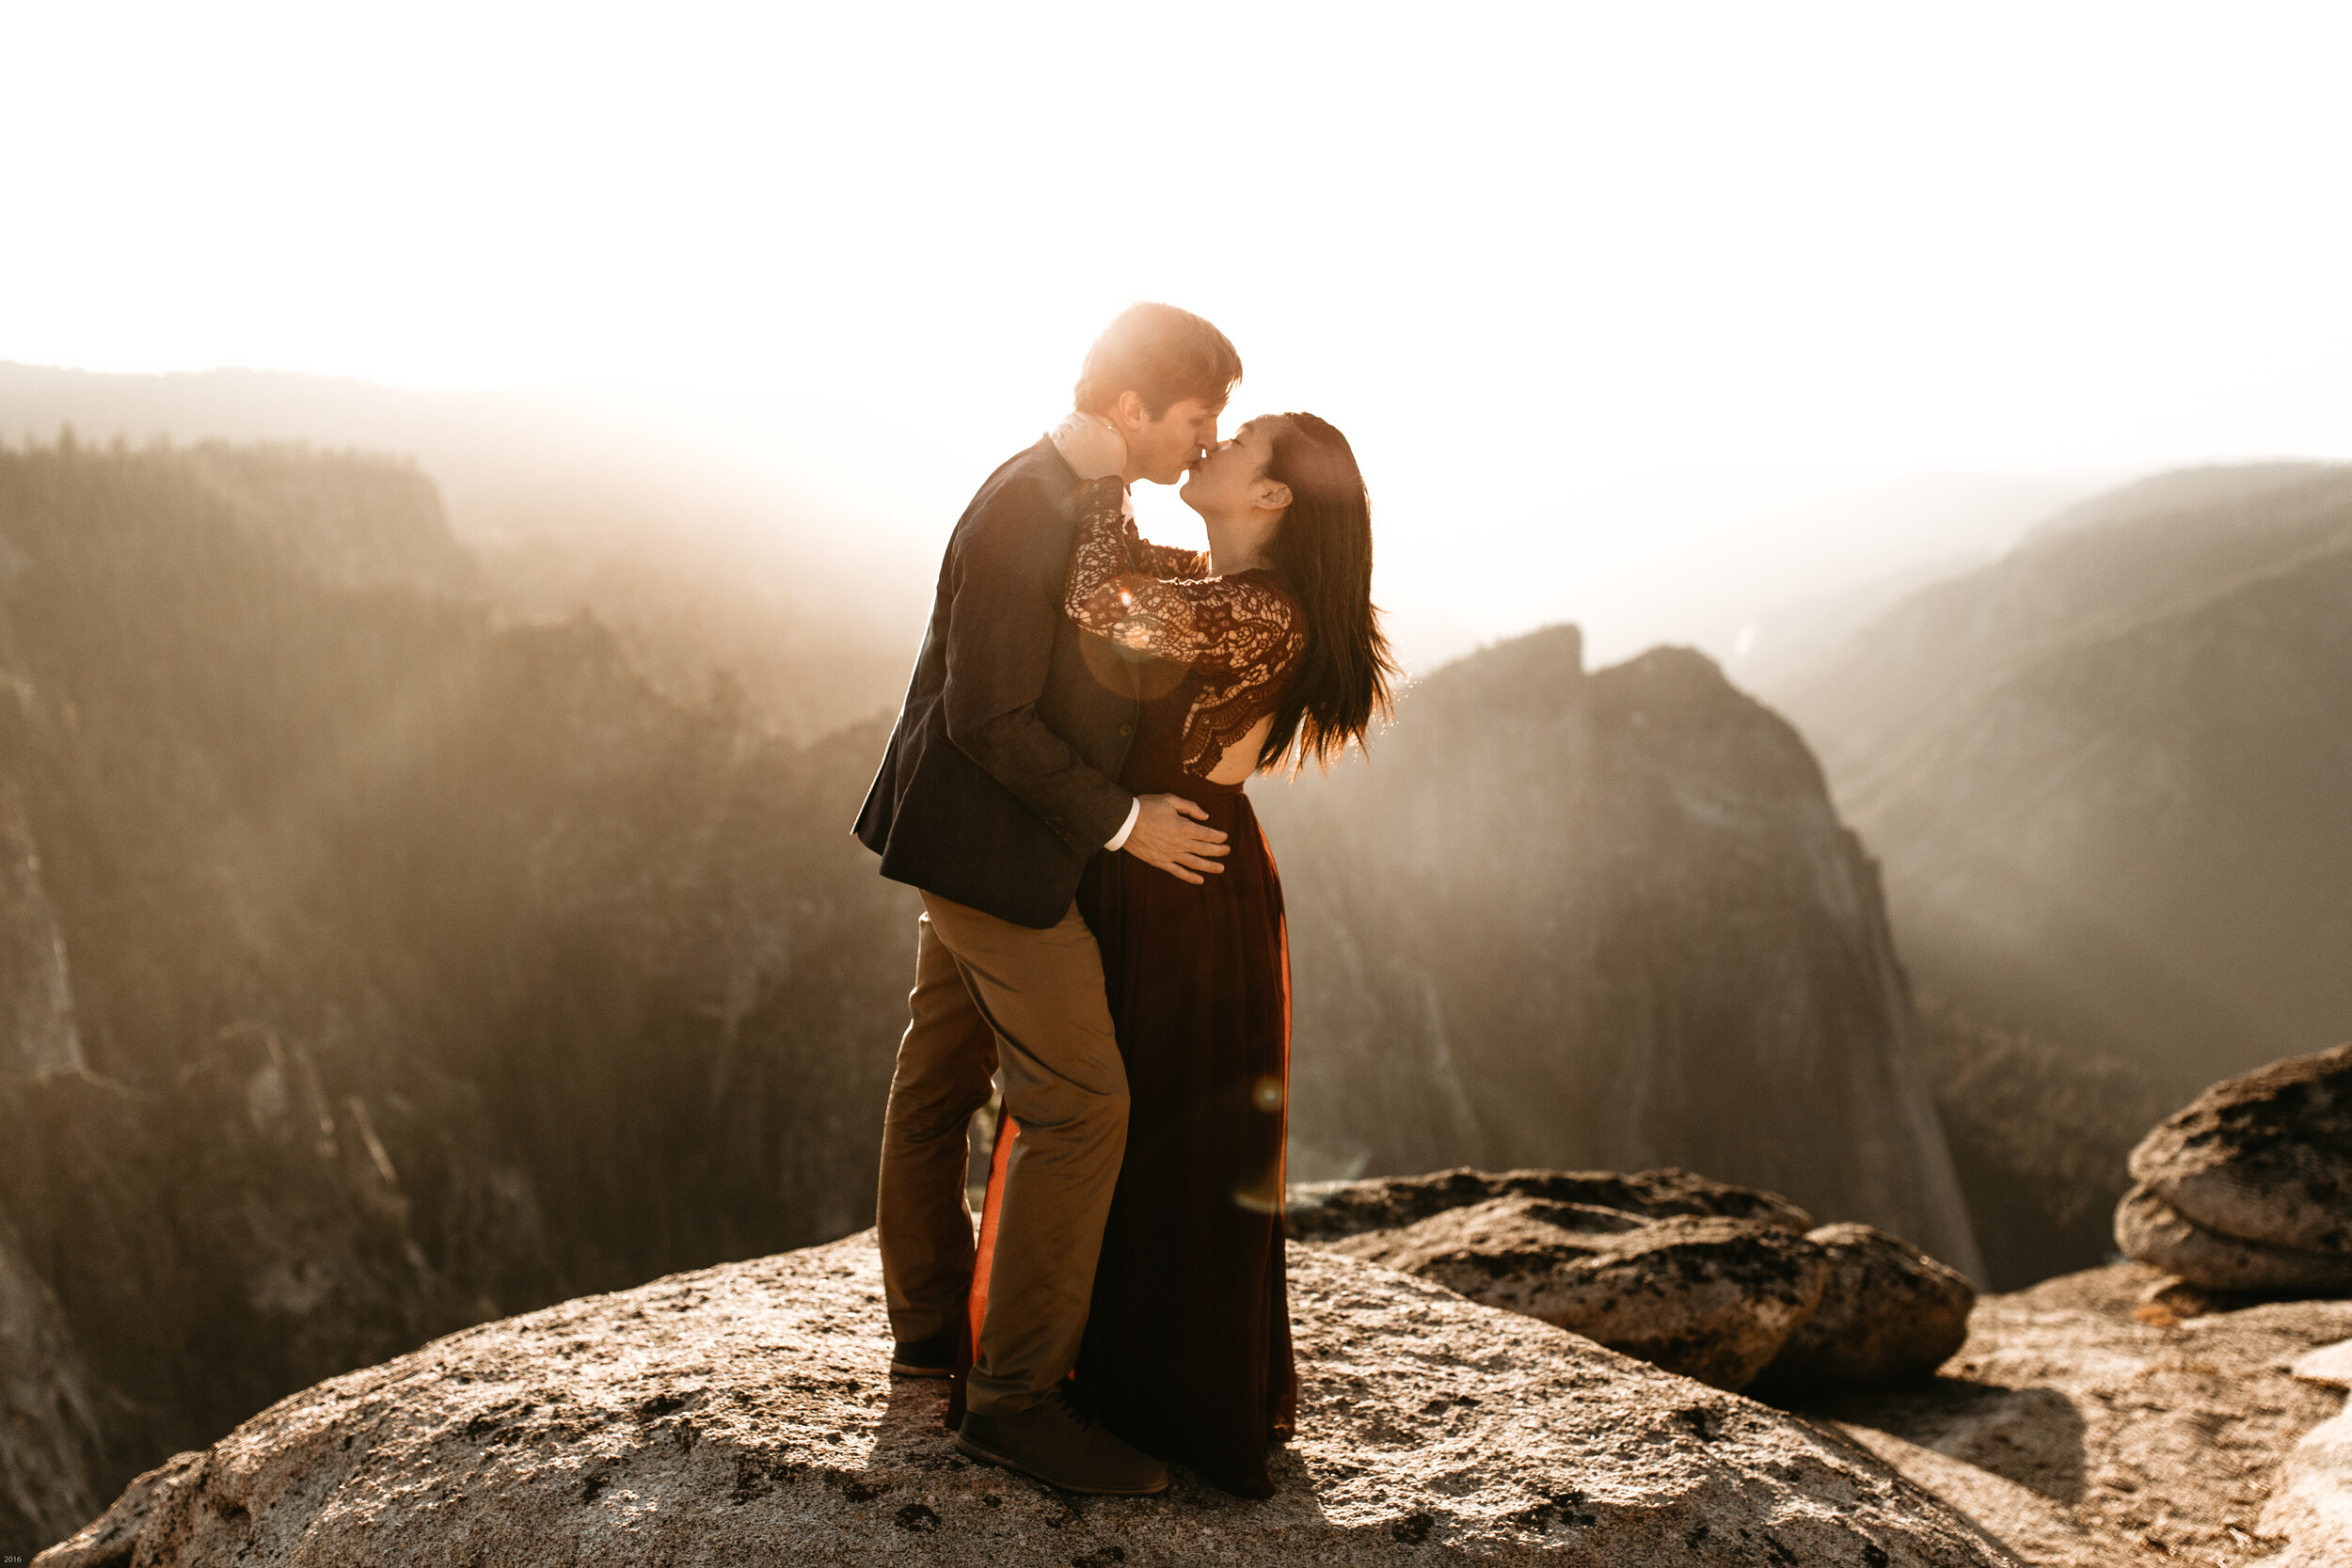 yosemite-national-park-couples-session-at-taft-point-and-yosemite-valley-yosemite-elopement-photographer-nicole-daacke-photography-132.jpg